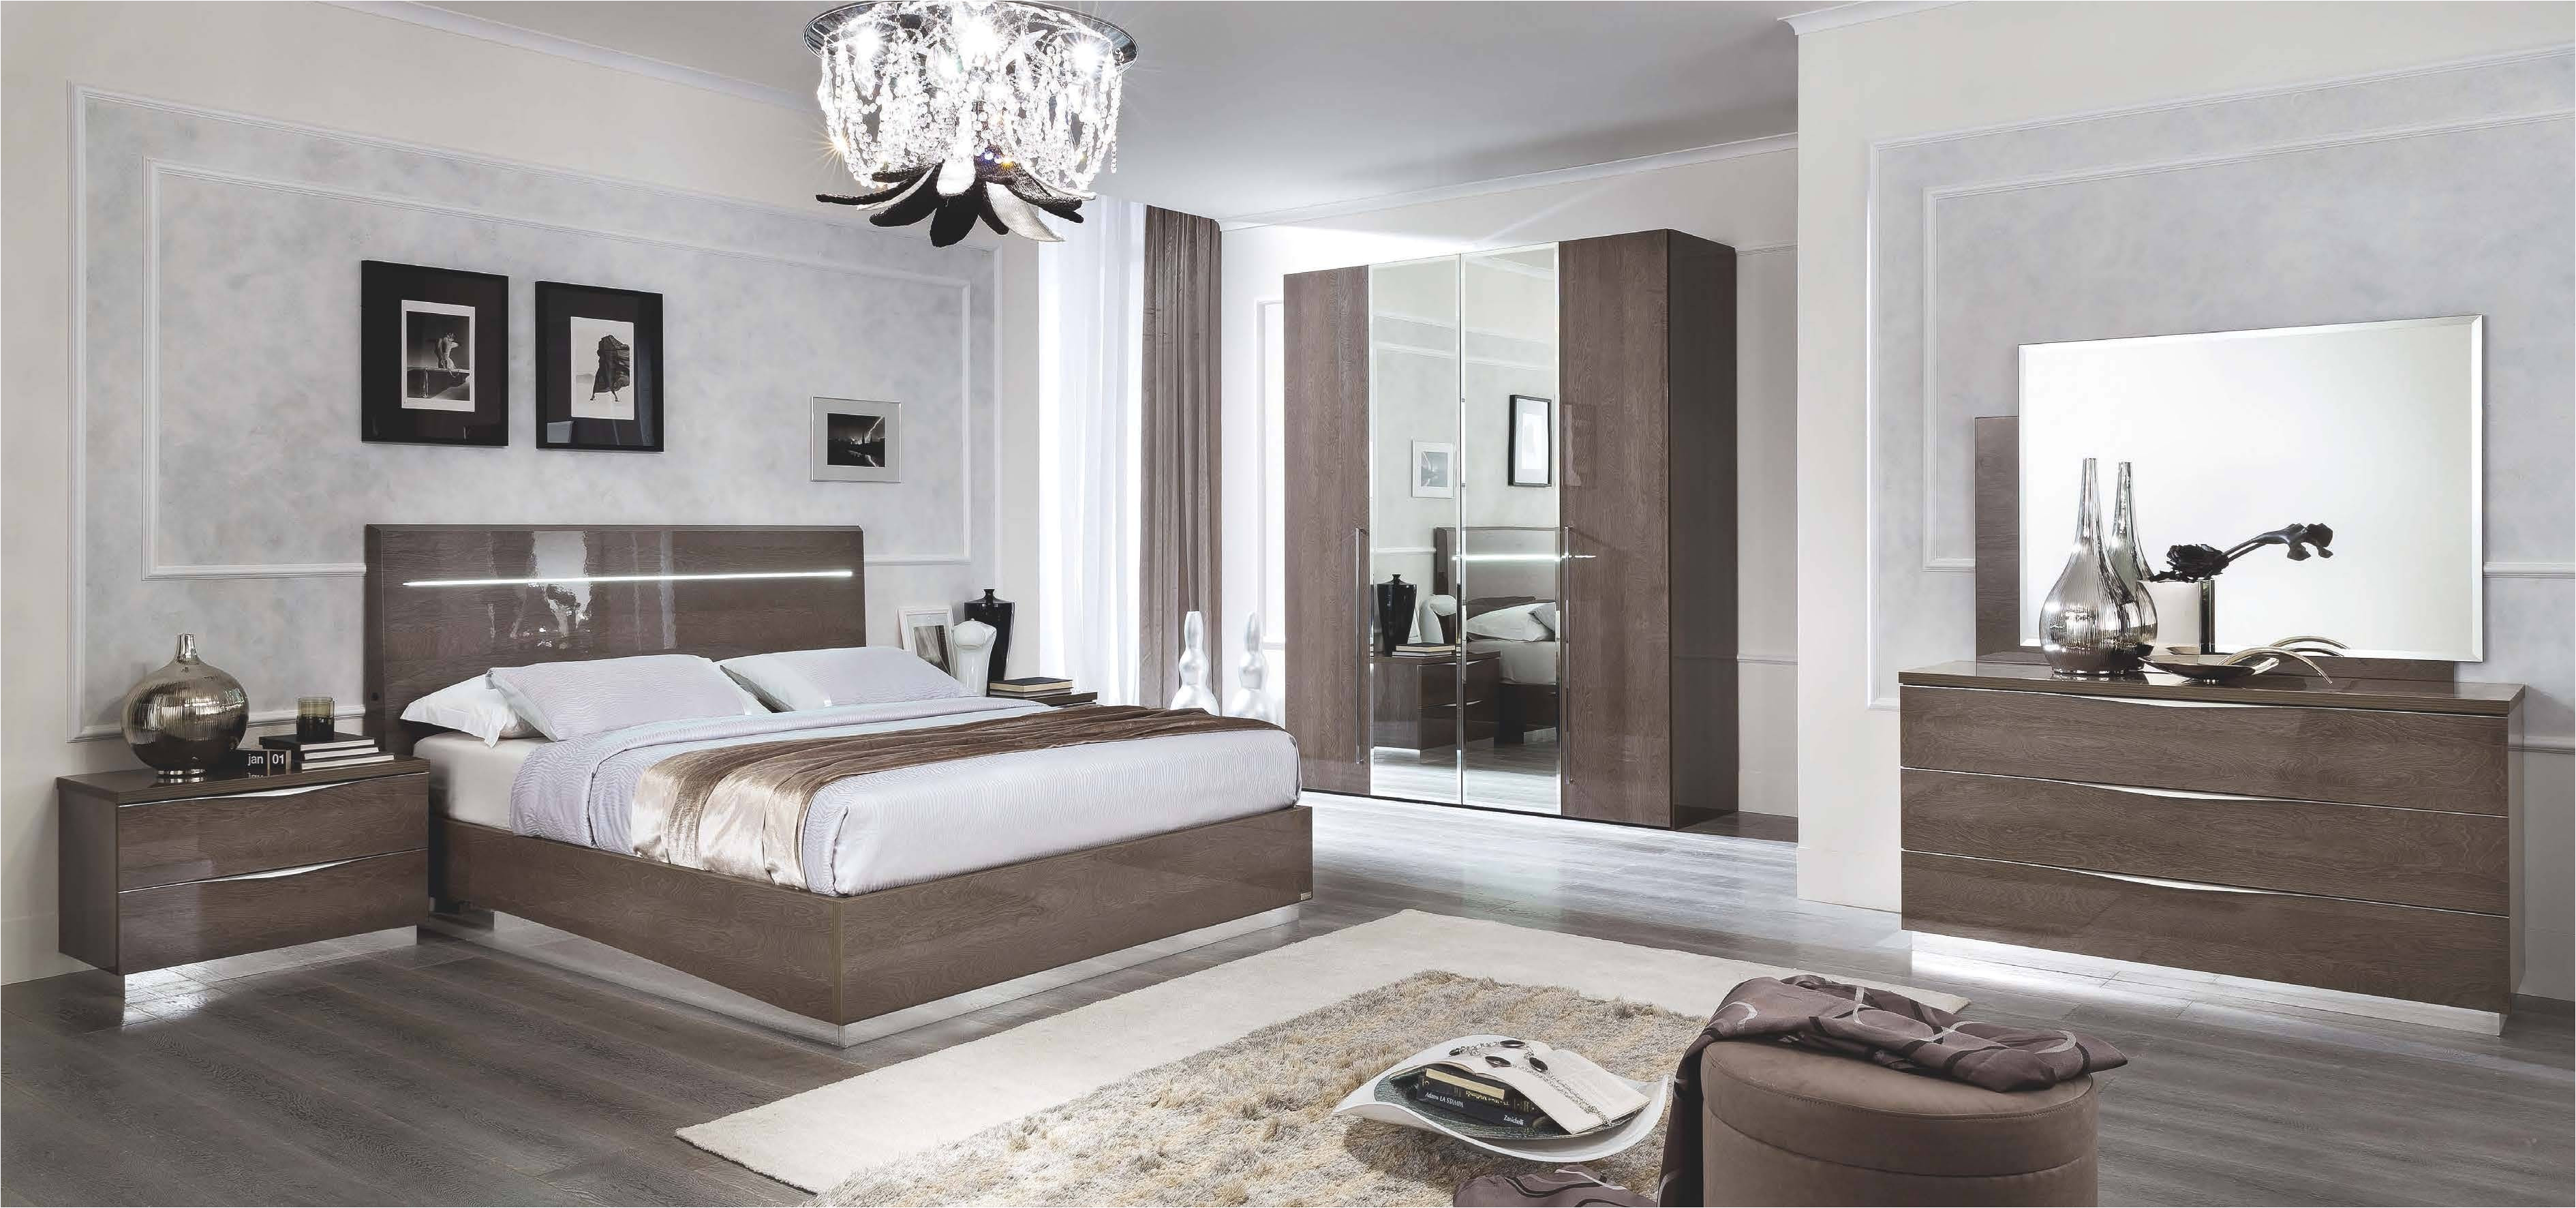 luxury american freight bedroom sets bedroom furniture san antonio made in italy quality high end bedroom